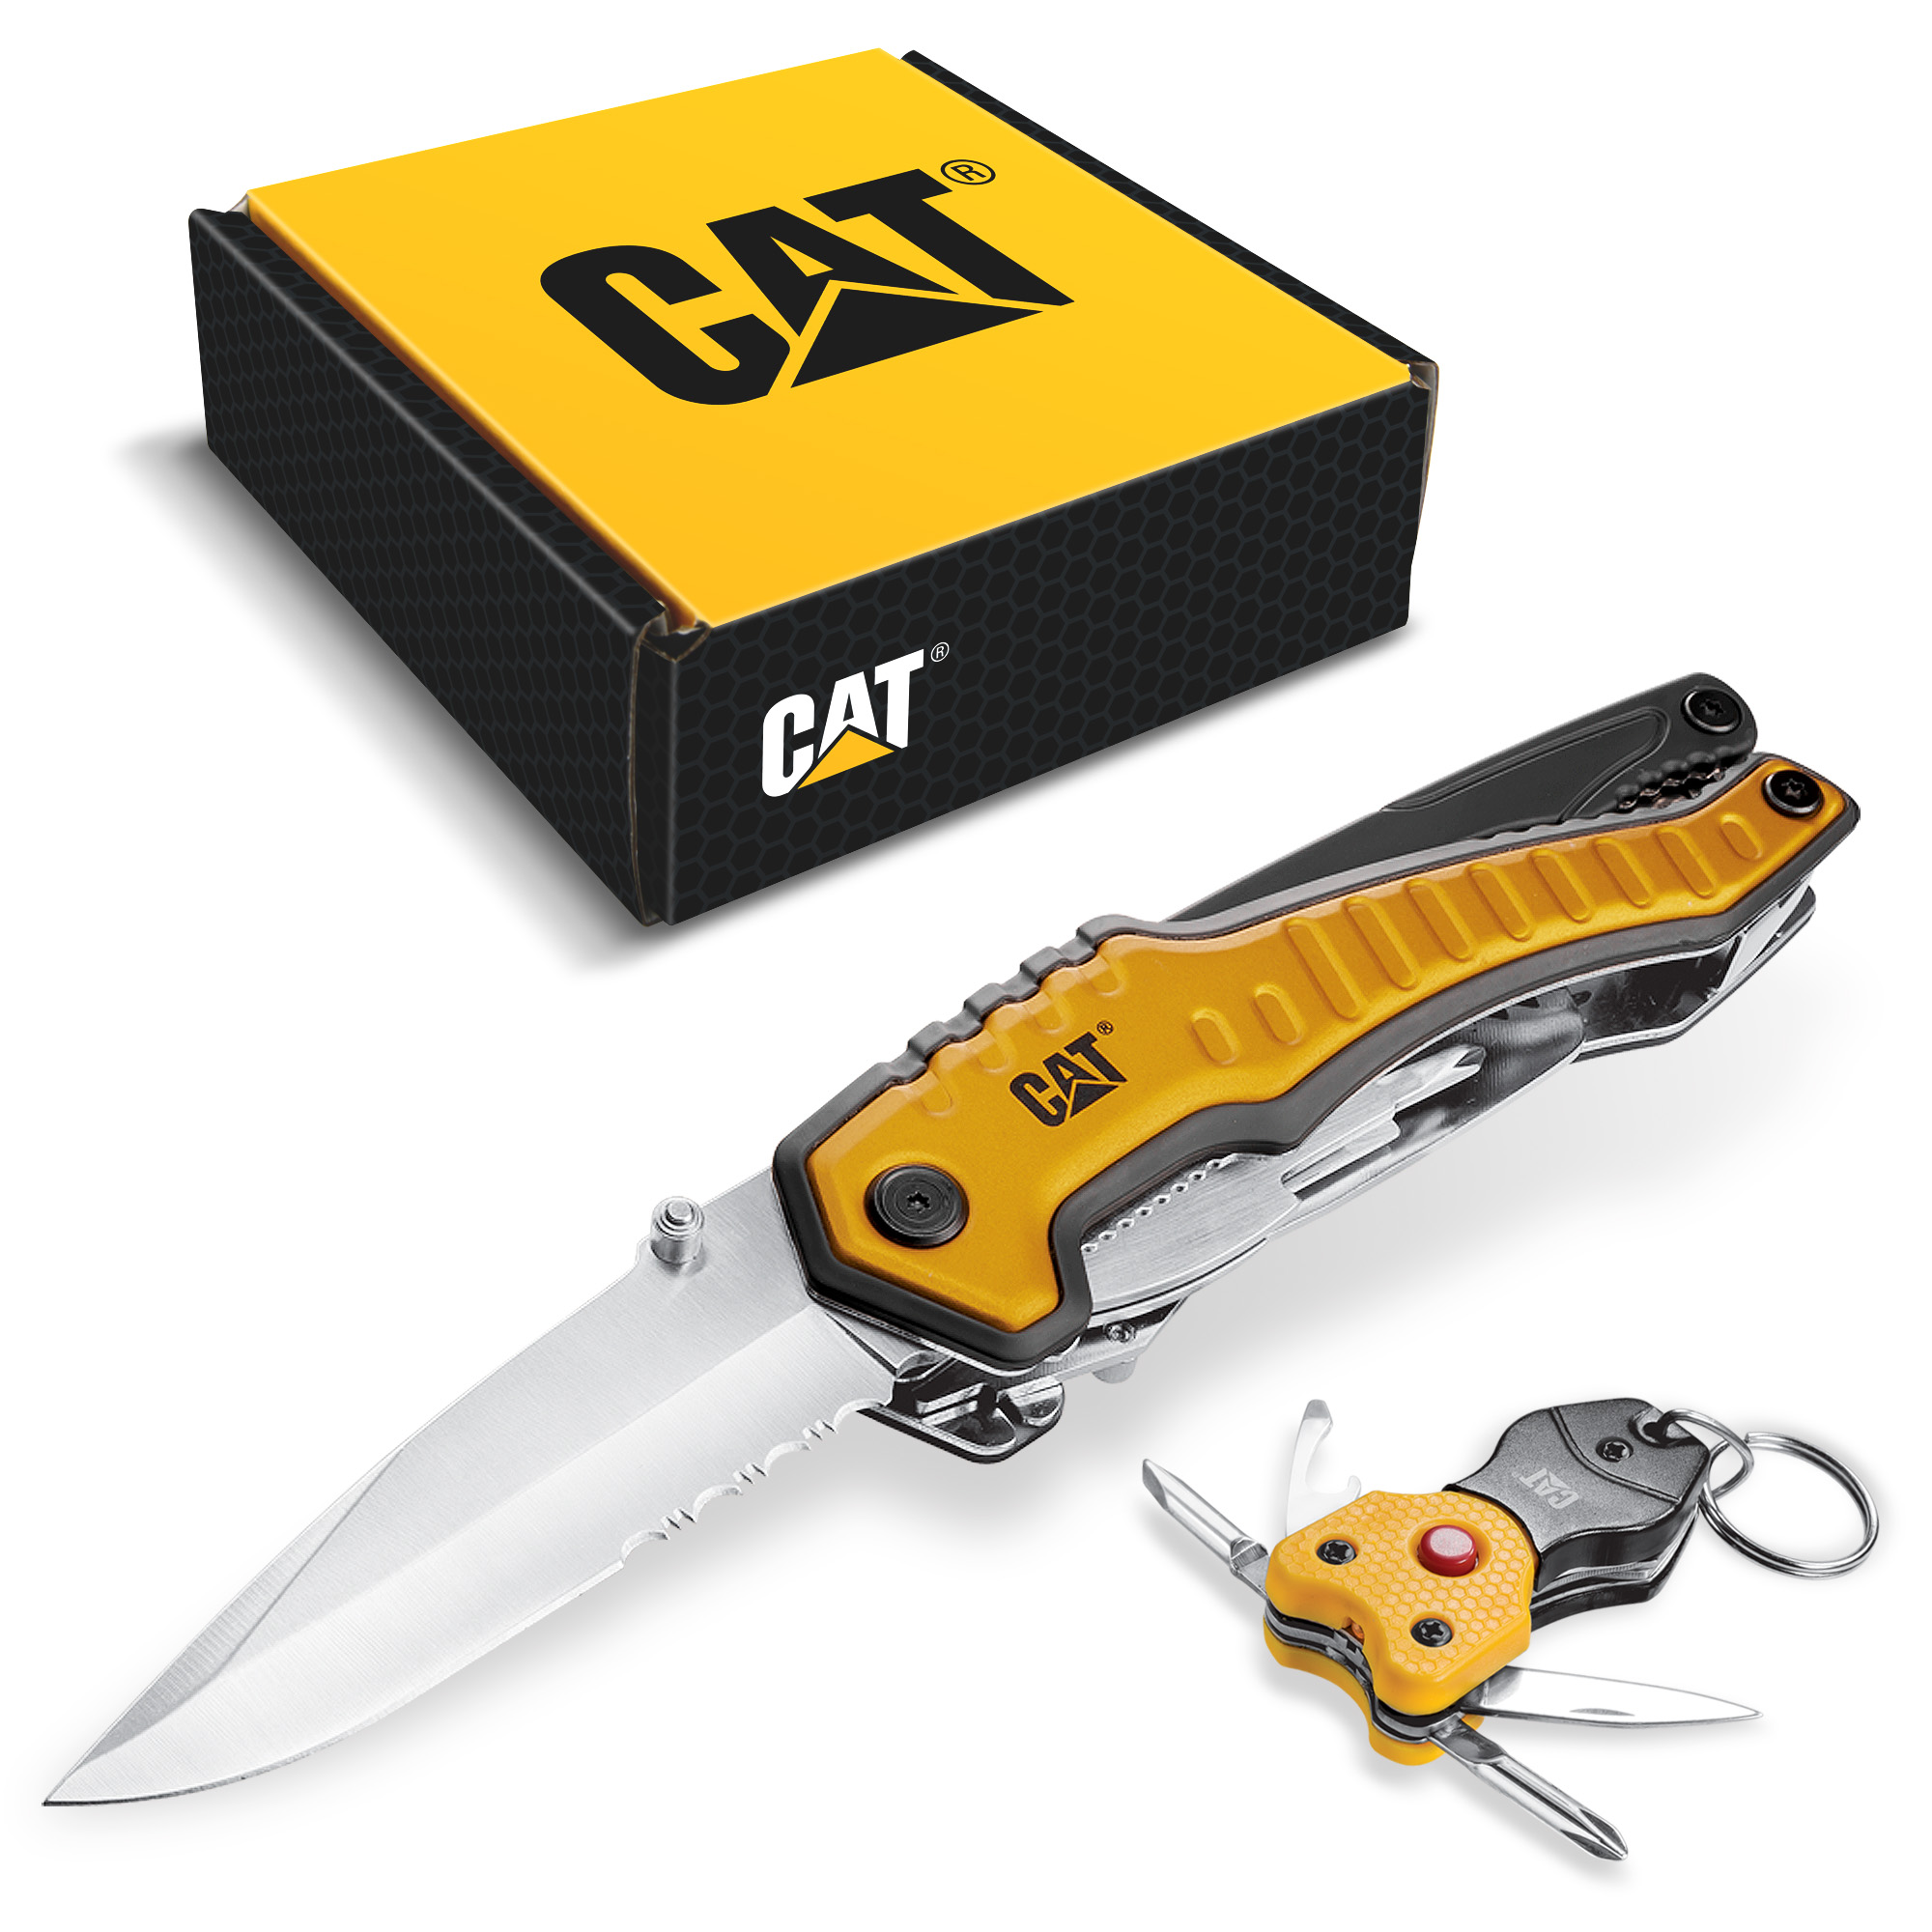 Cat Footwear Cat 2 Piece XL Multi-Tool and Multi-Tool Key Chain with Light Gift Box Set - 240240